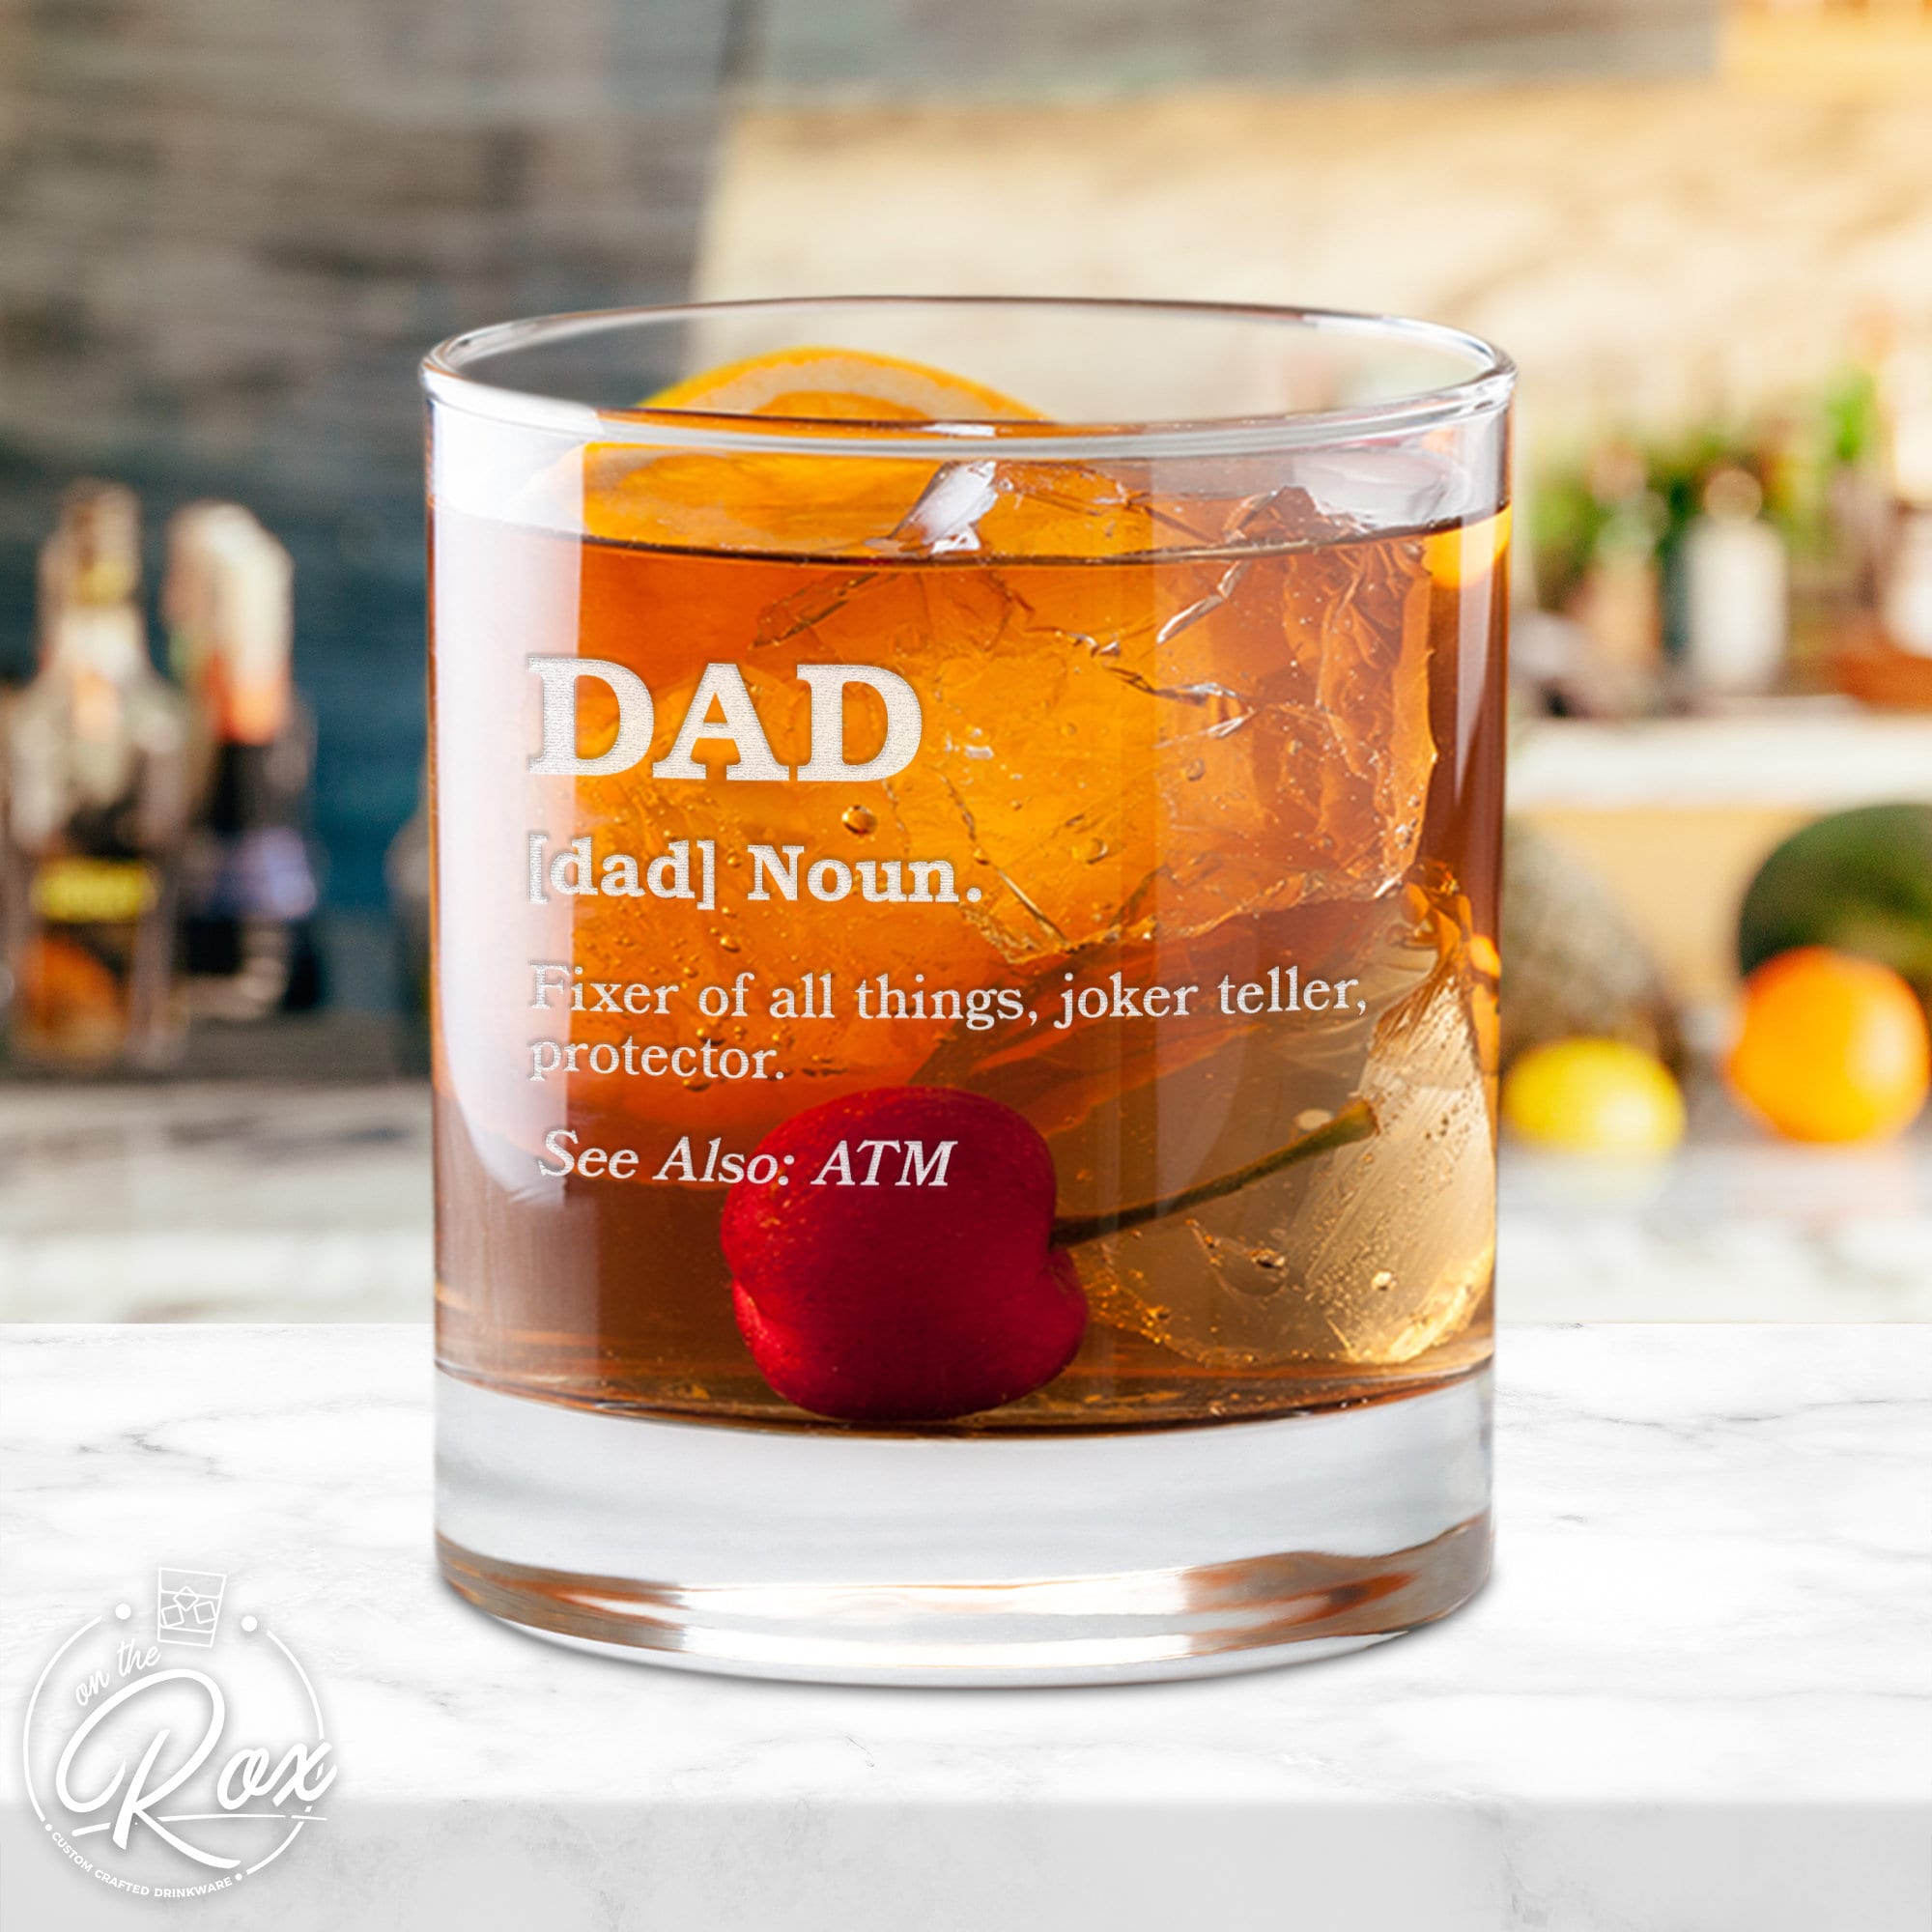 Corellian Whiskey Glass, Gift For Dad, Gift For Him - Personalizy